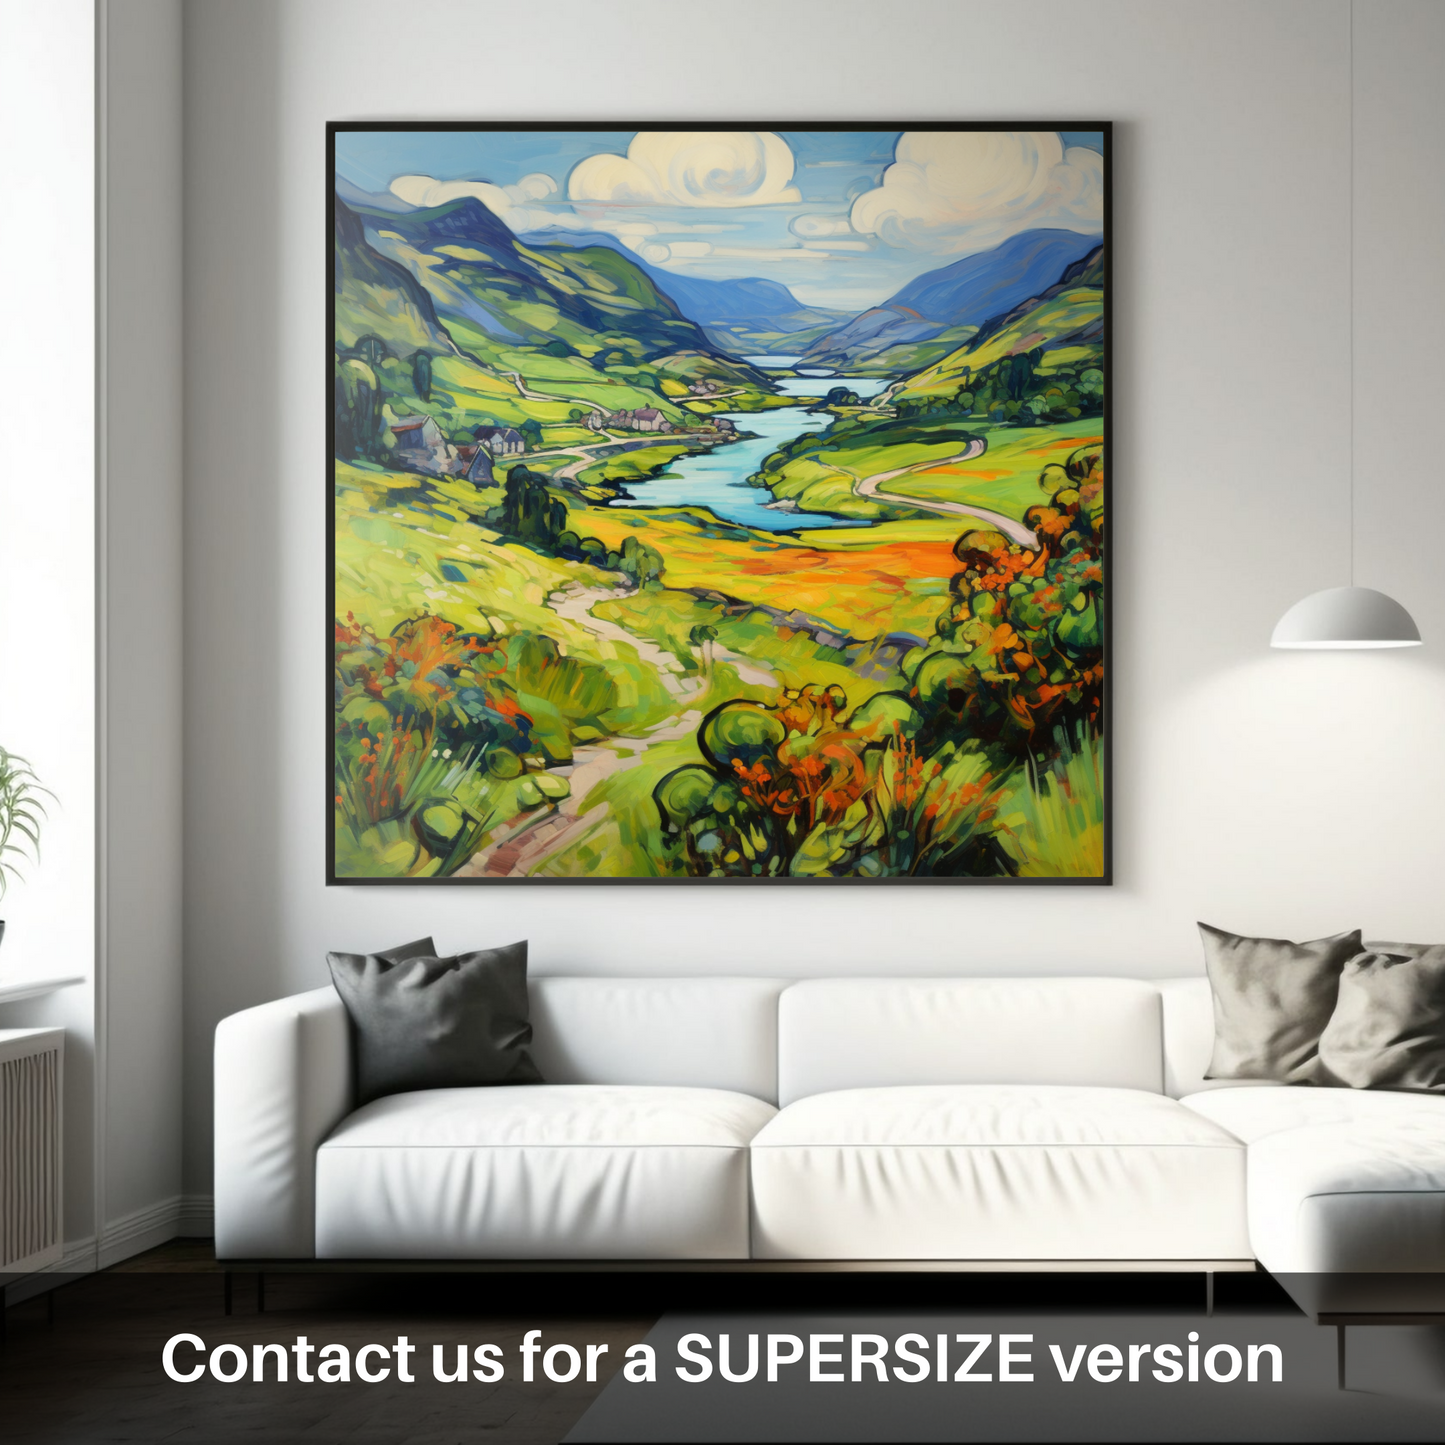 Huge supersize print of Glen Falloch, Argyll and Bute in summer